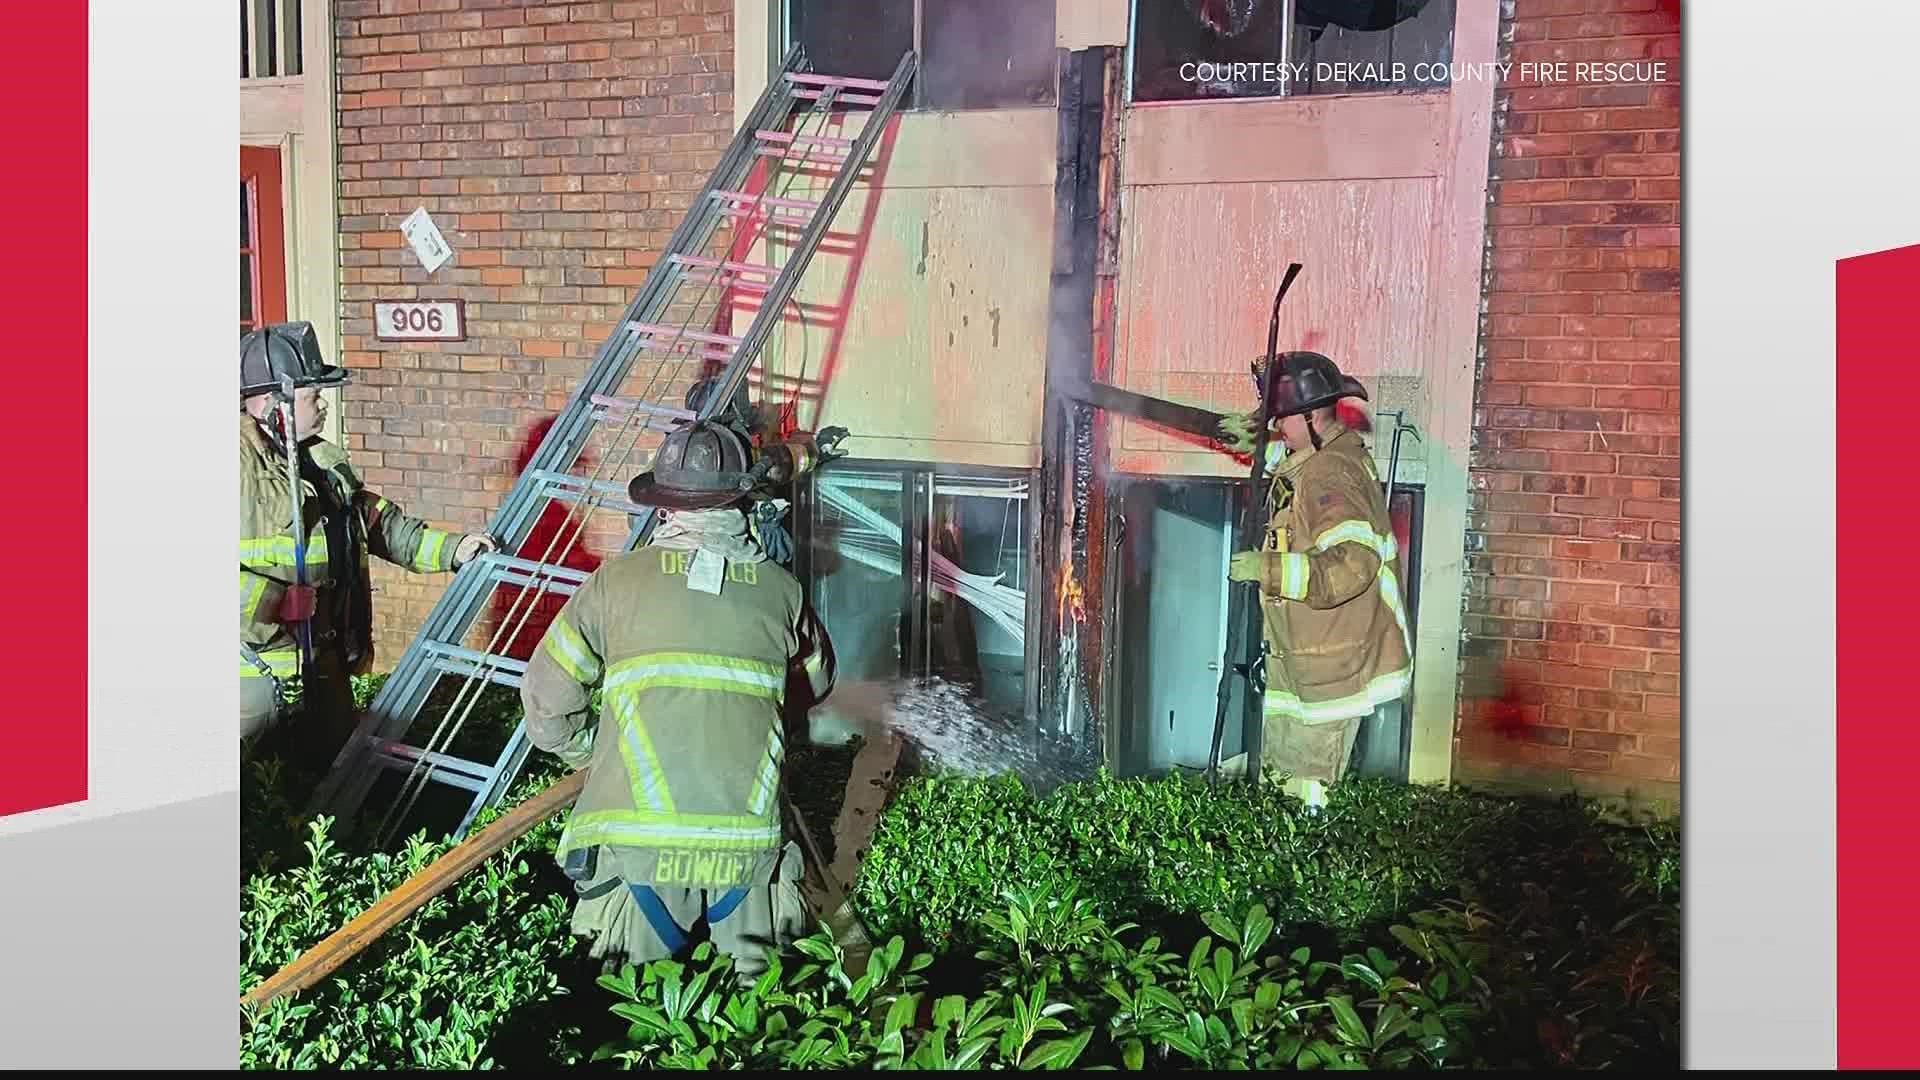 DeKalb County Fire Rescue said it happened just after 1:30 a.m. Saturday morning.